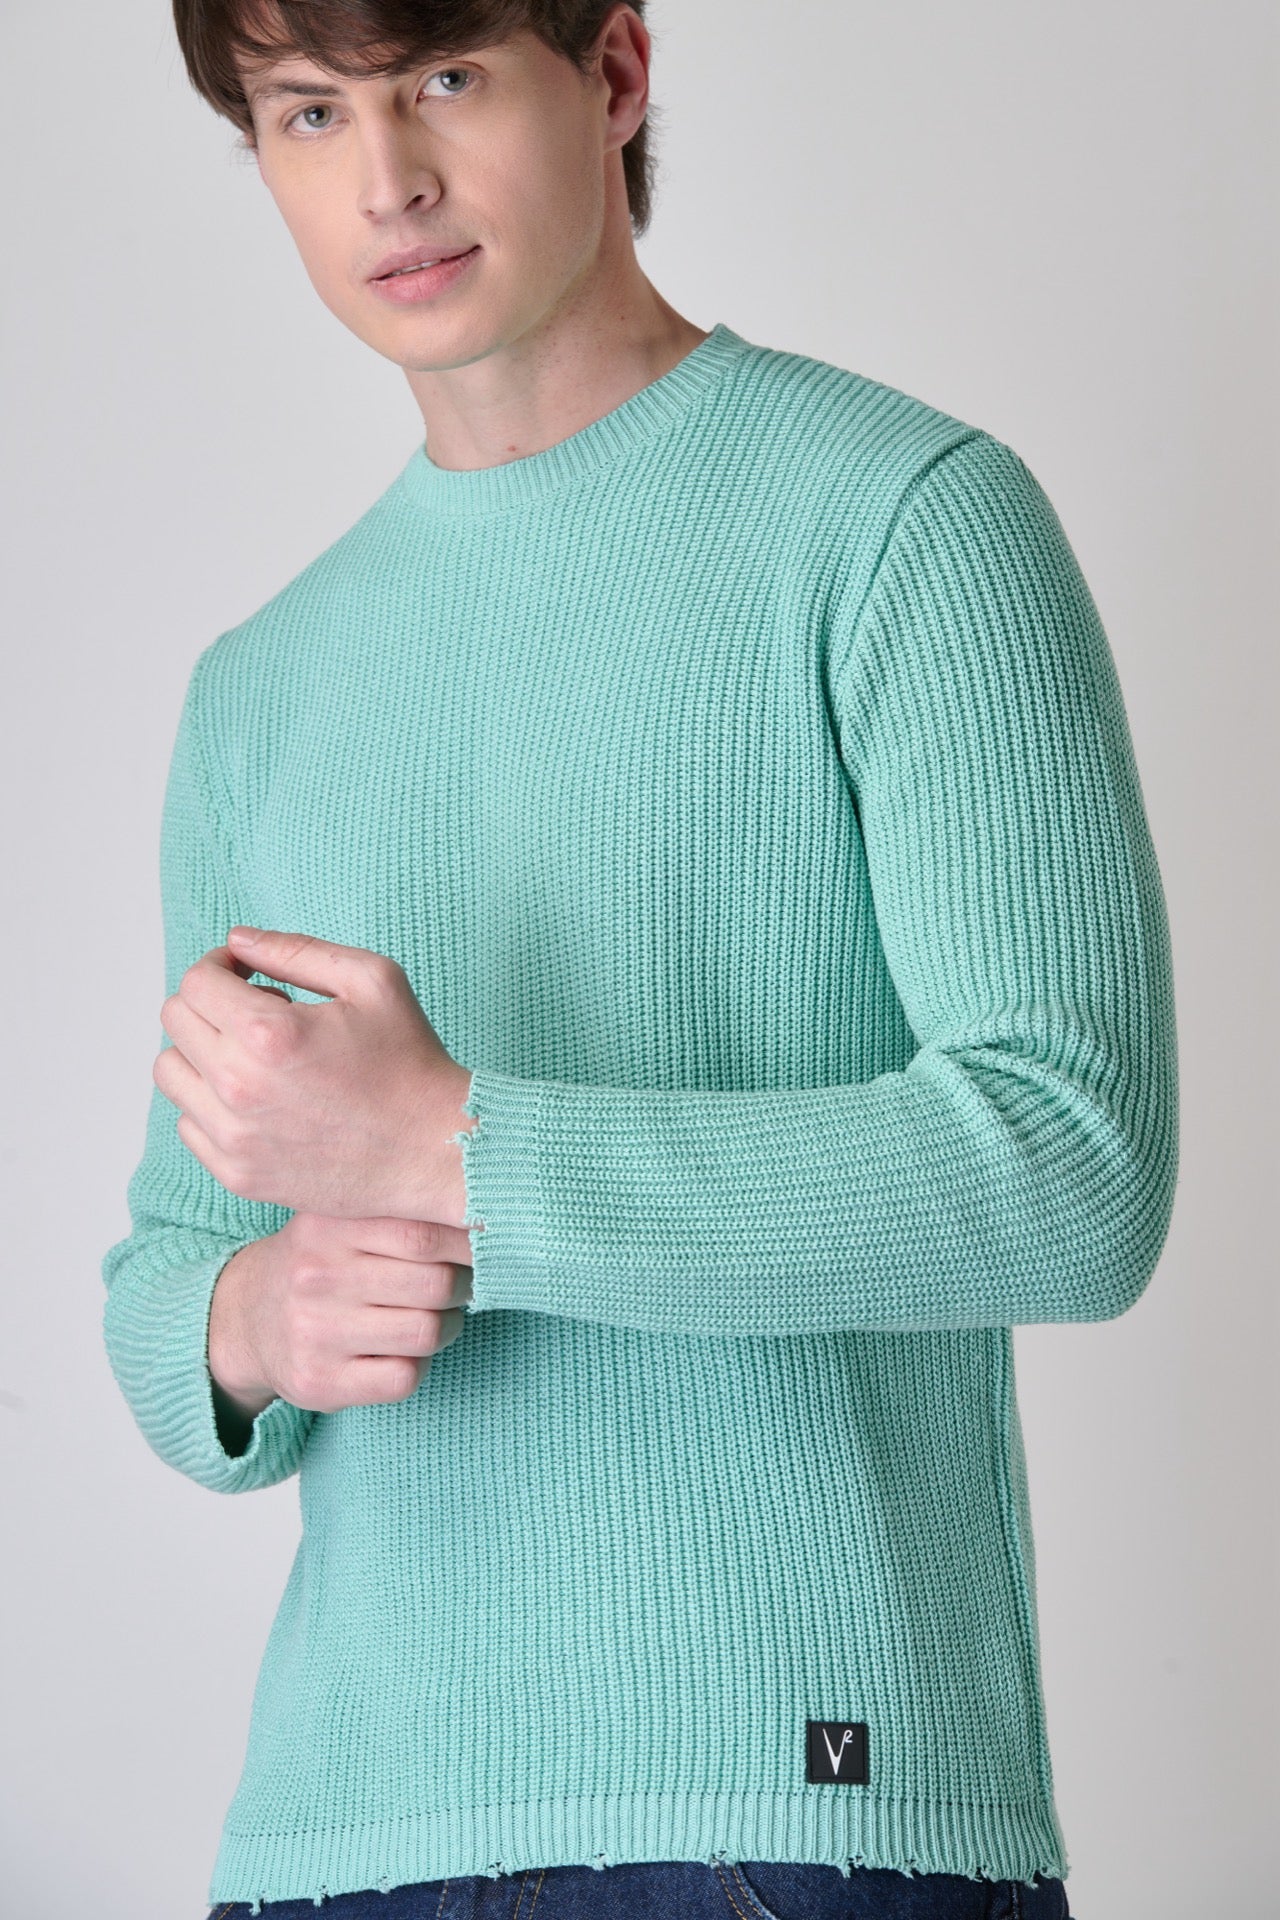 Mint Green crew neck sweater with tears